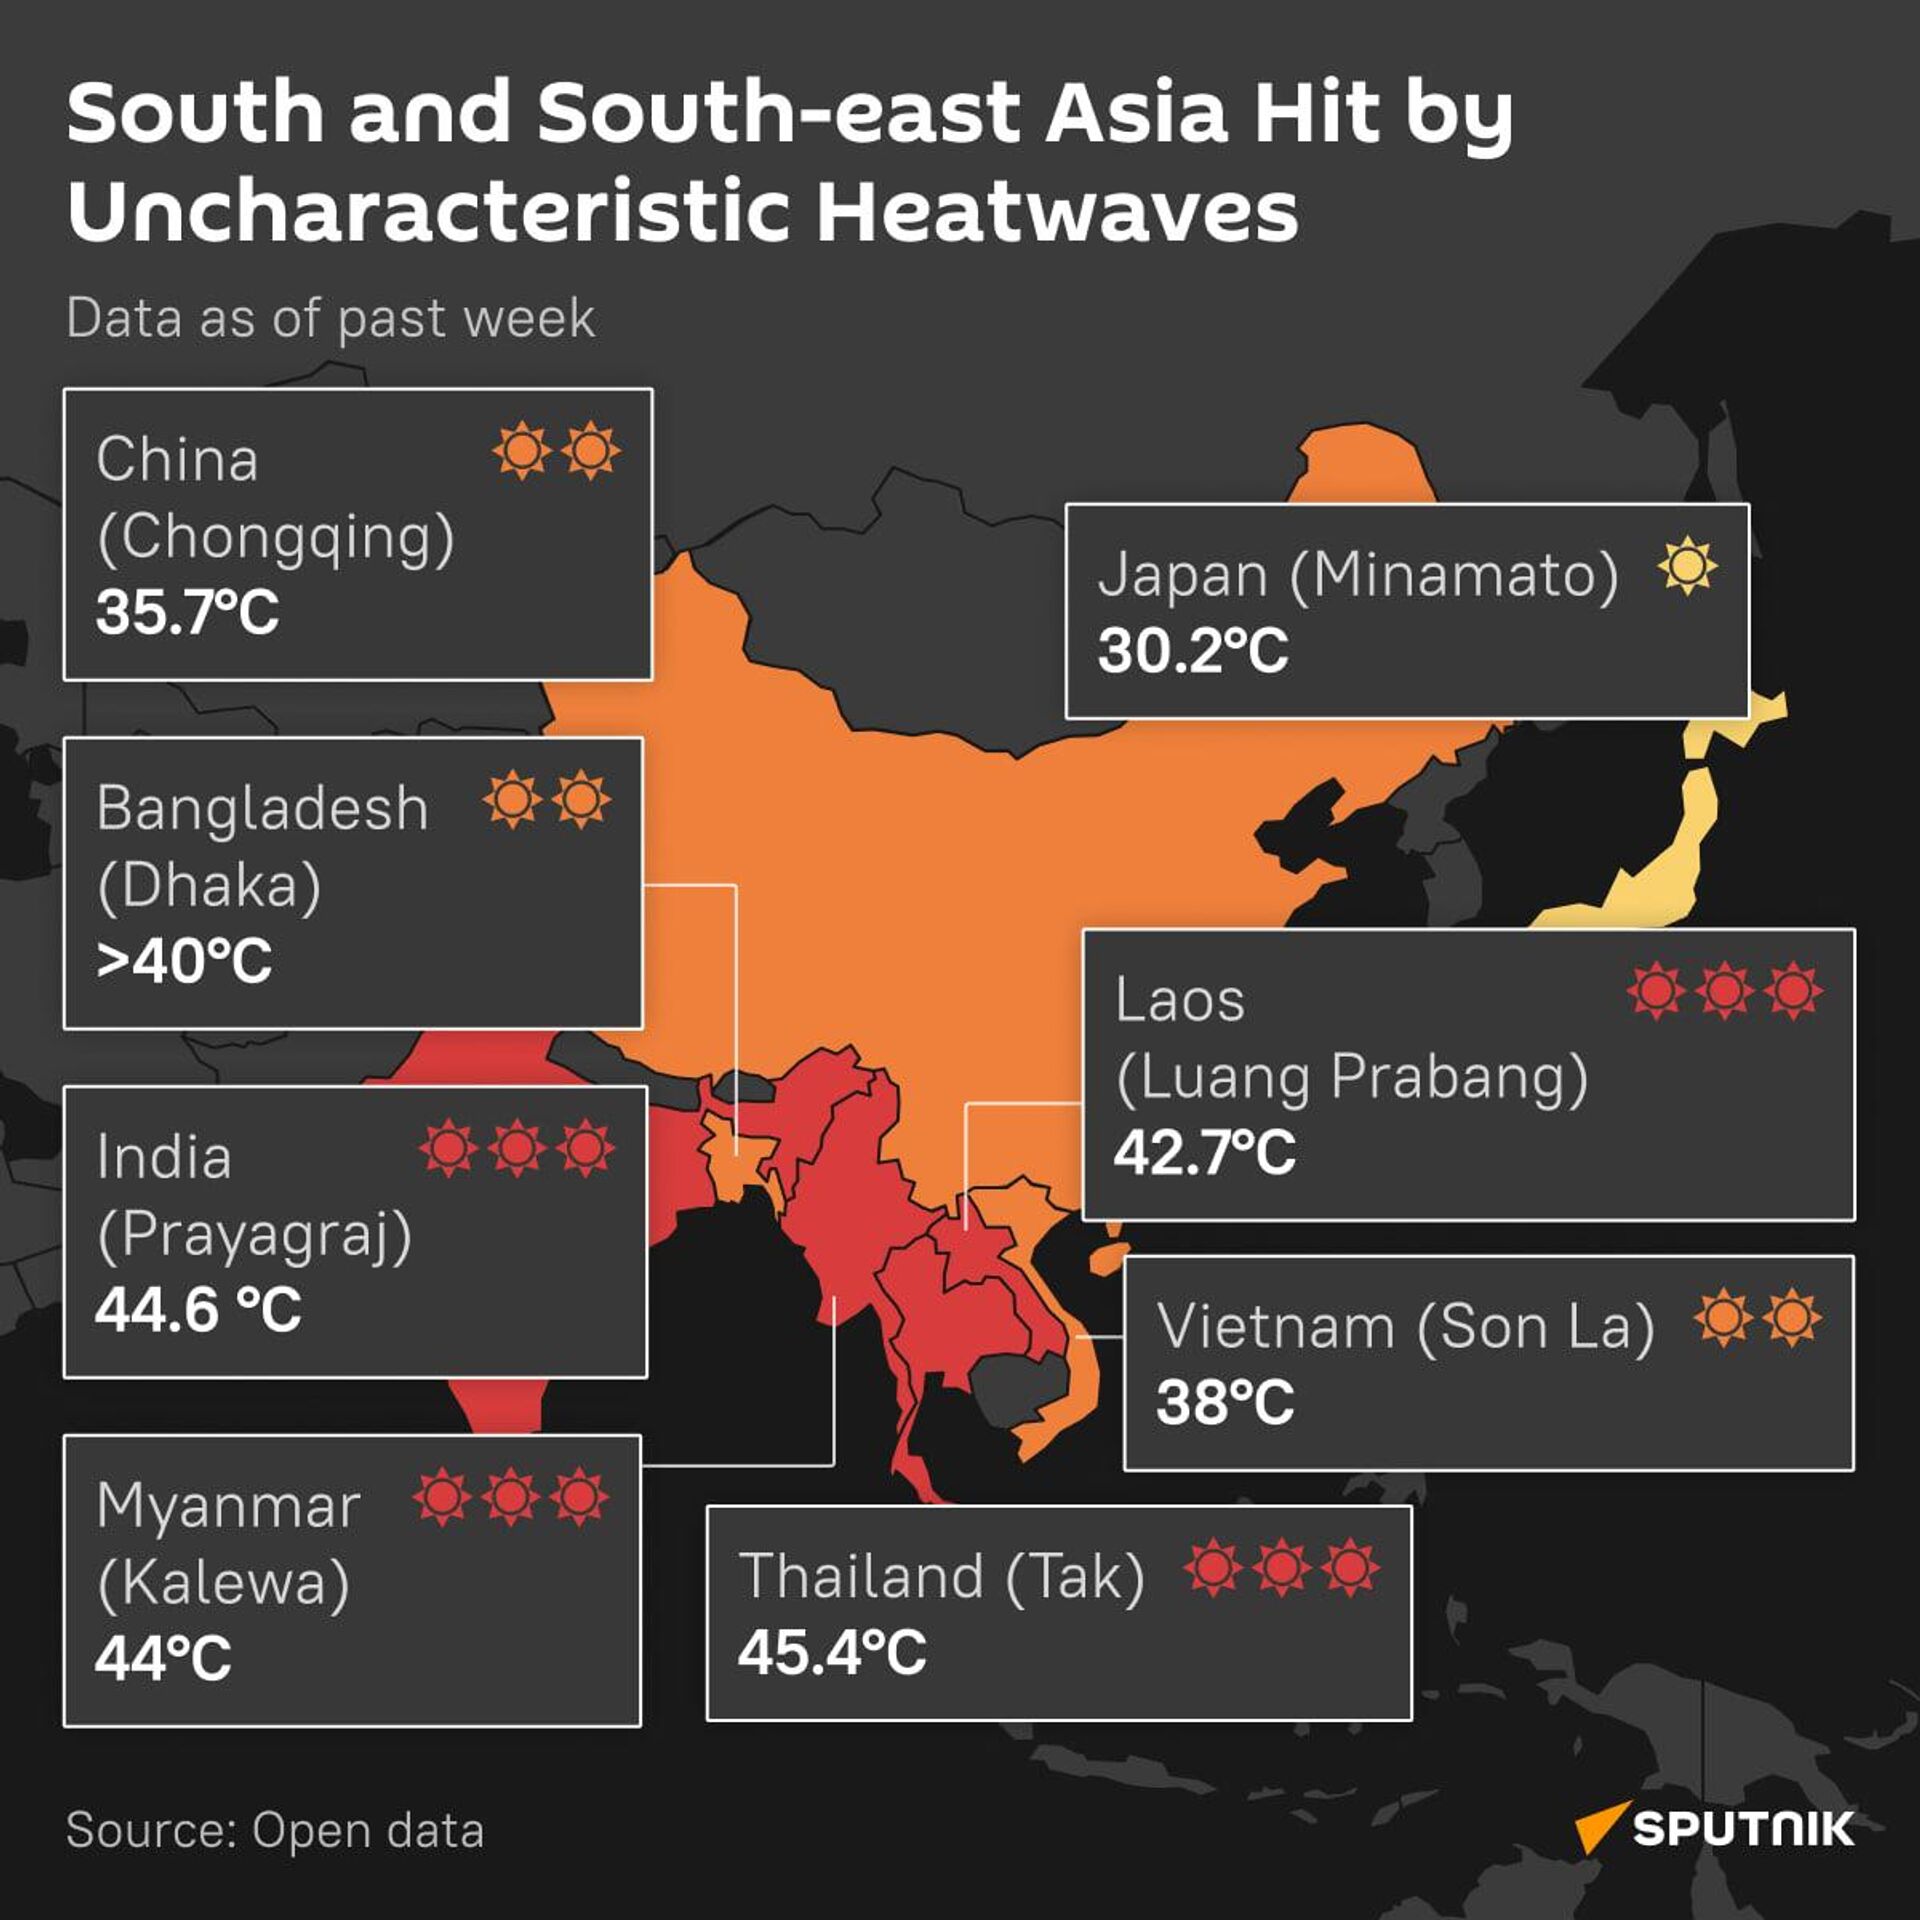 South and Southeast Asia Hit by Uncharacteristic Heatwaves 21.04.